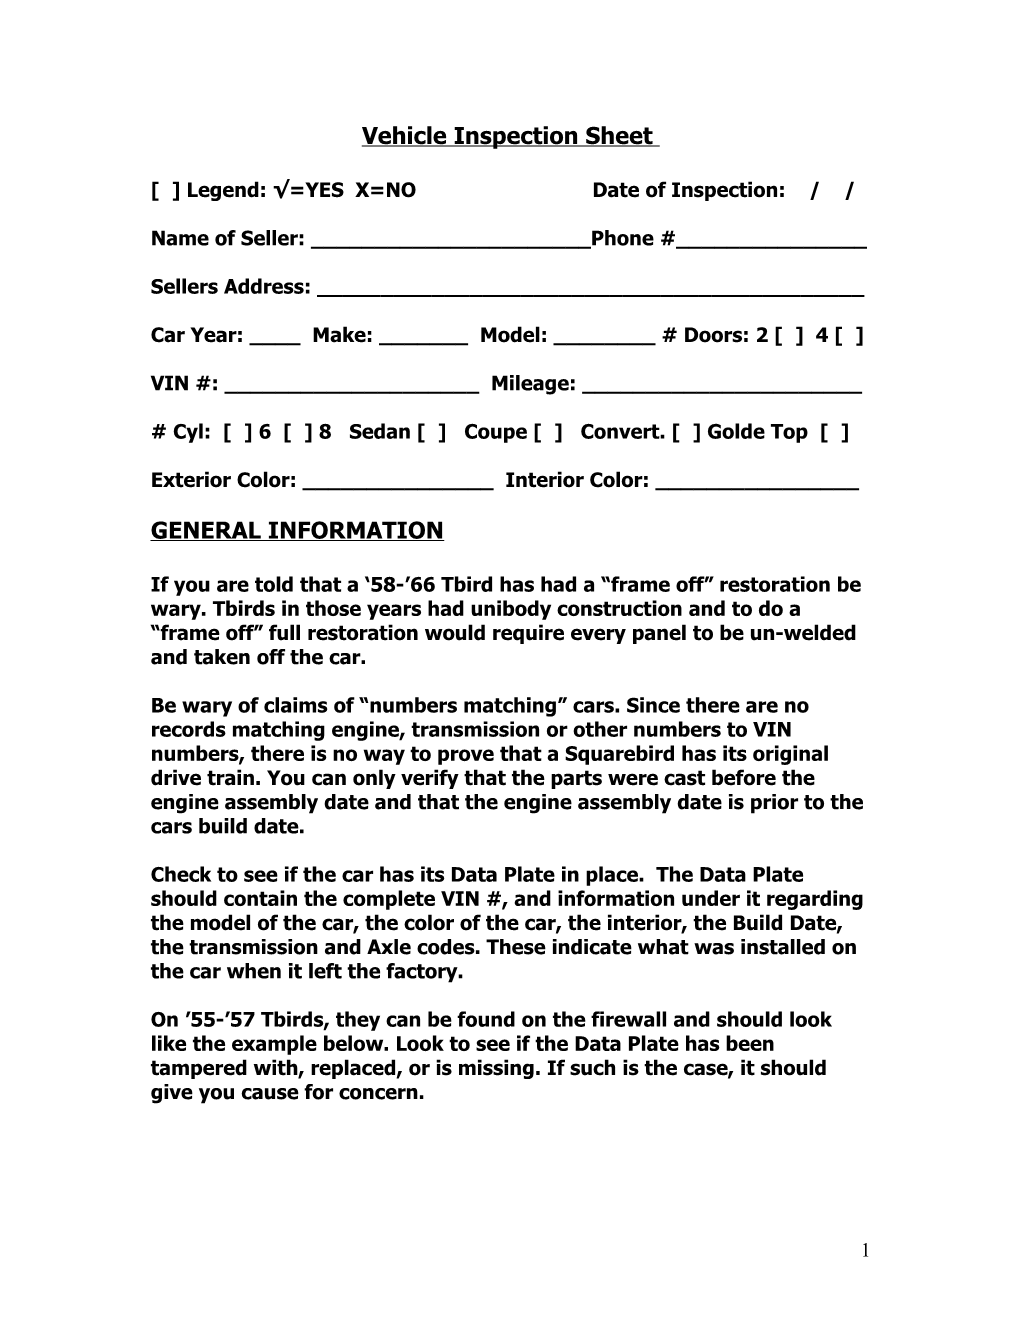 Vehicle Inspection Sheet Page 1